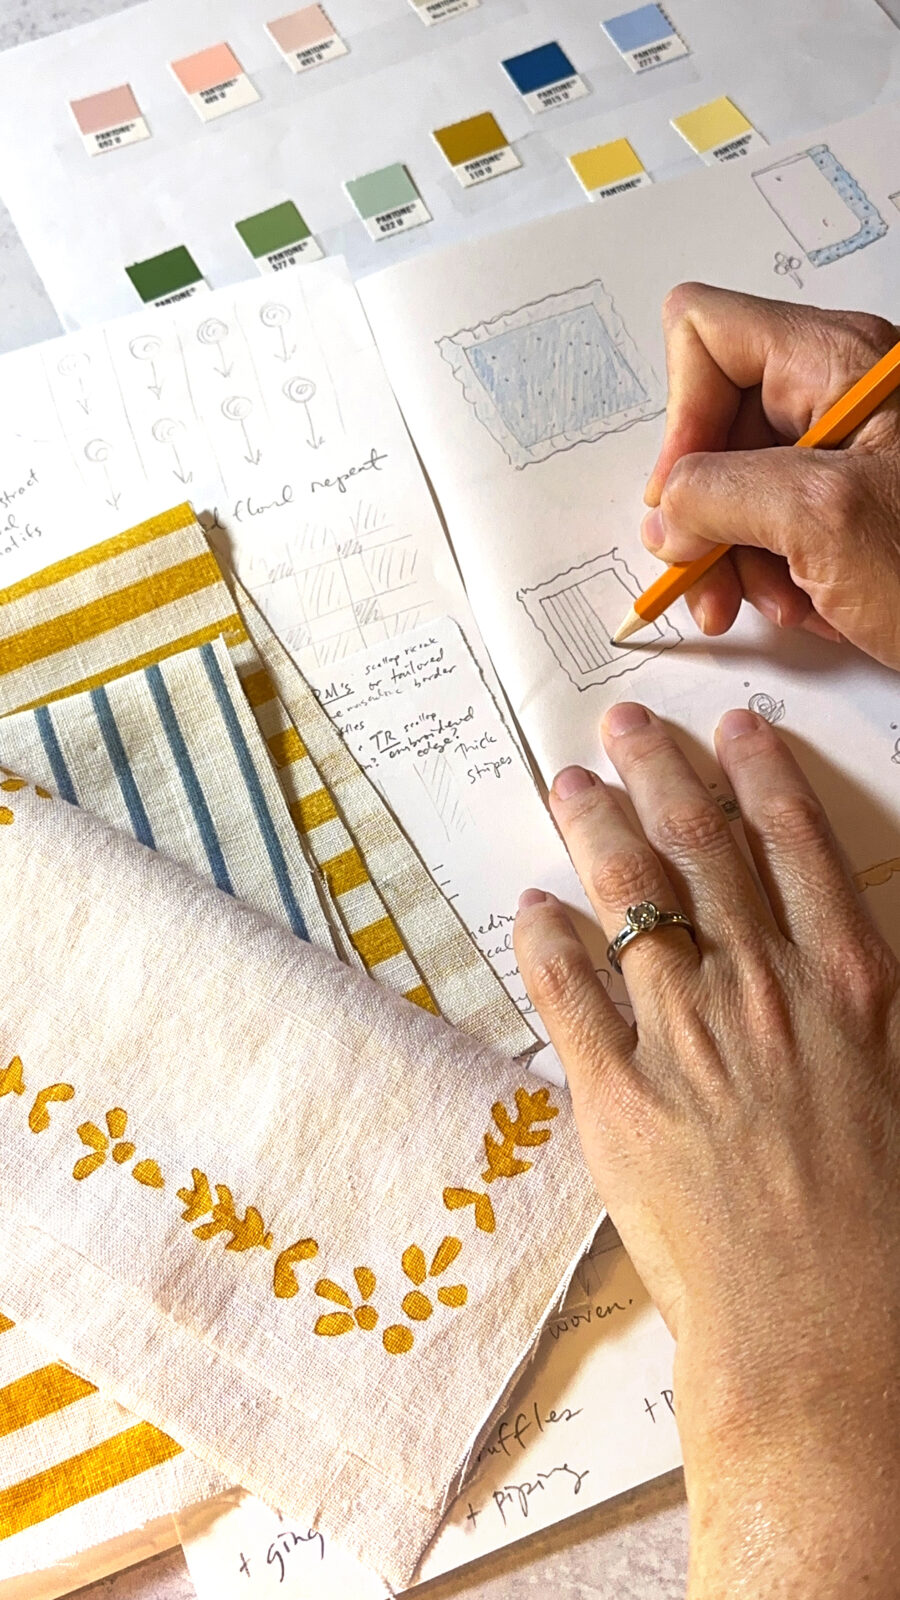 Hands are shown drawing designs for tabletop linens on paper. Color swatches and fabric samples are also in the frame.